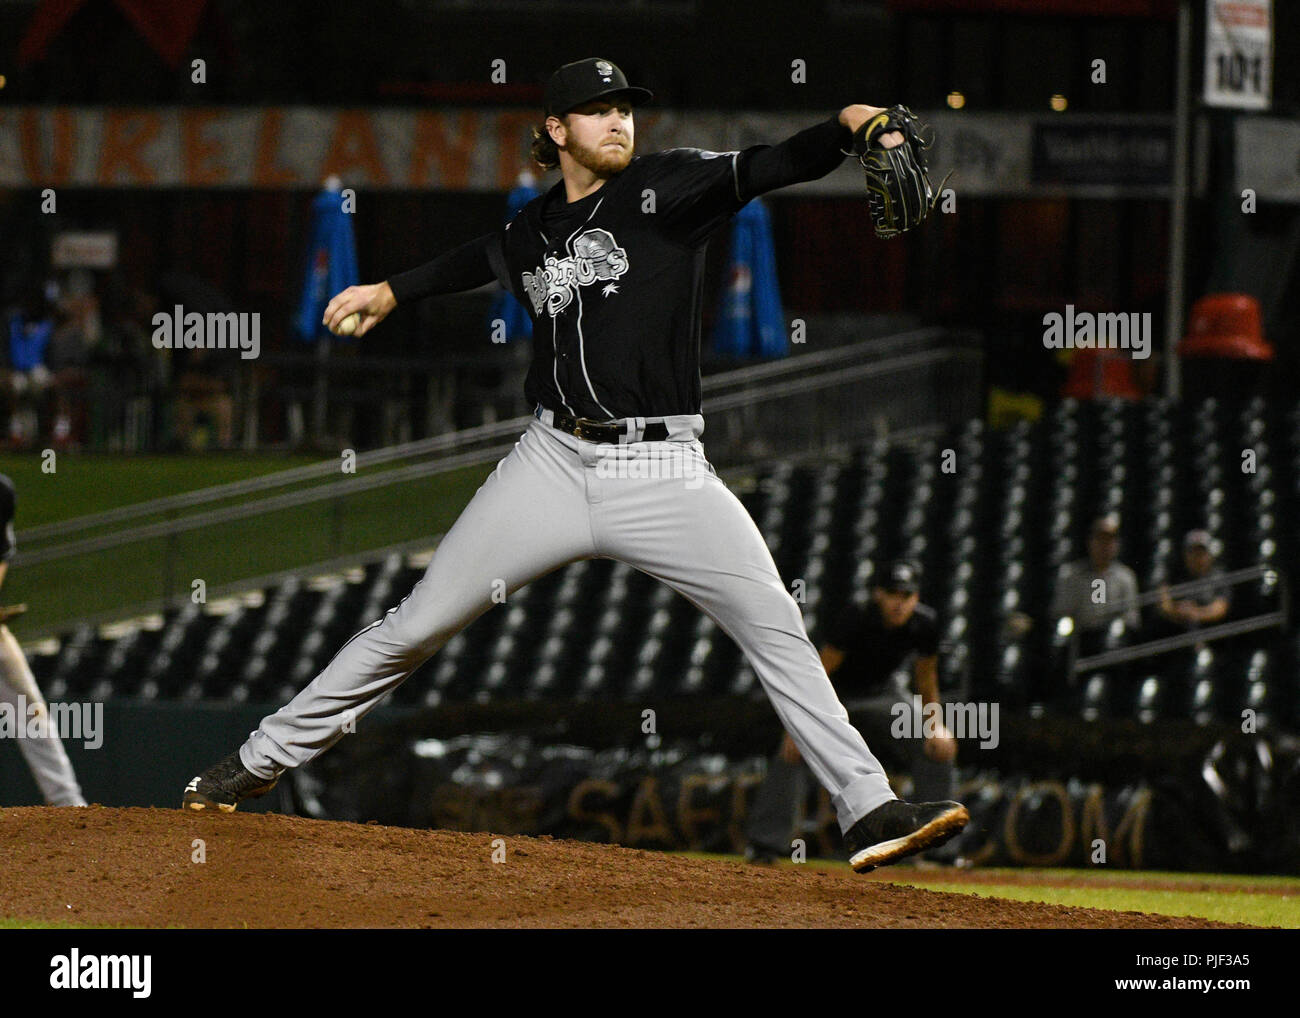 The Second Round. 6th Sep, 2018. USA Lansing Lugnuts pitcher Brayden Bouchey (34) throws a pitch during a Mid West League series between the Lansing Lugnuts and the Bowling Green Hot Rods in Bowling Green, KY st Bowling Green Ballpark. Hot Rods sweep Lugnuts and advance to the second round. (Mandatory Photo Credit: Steve Roberts/CSM) Credit: csm/Alamy Live News Stock Photo